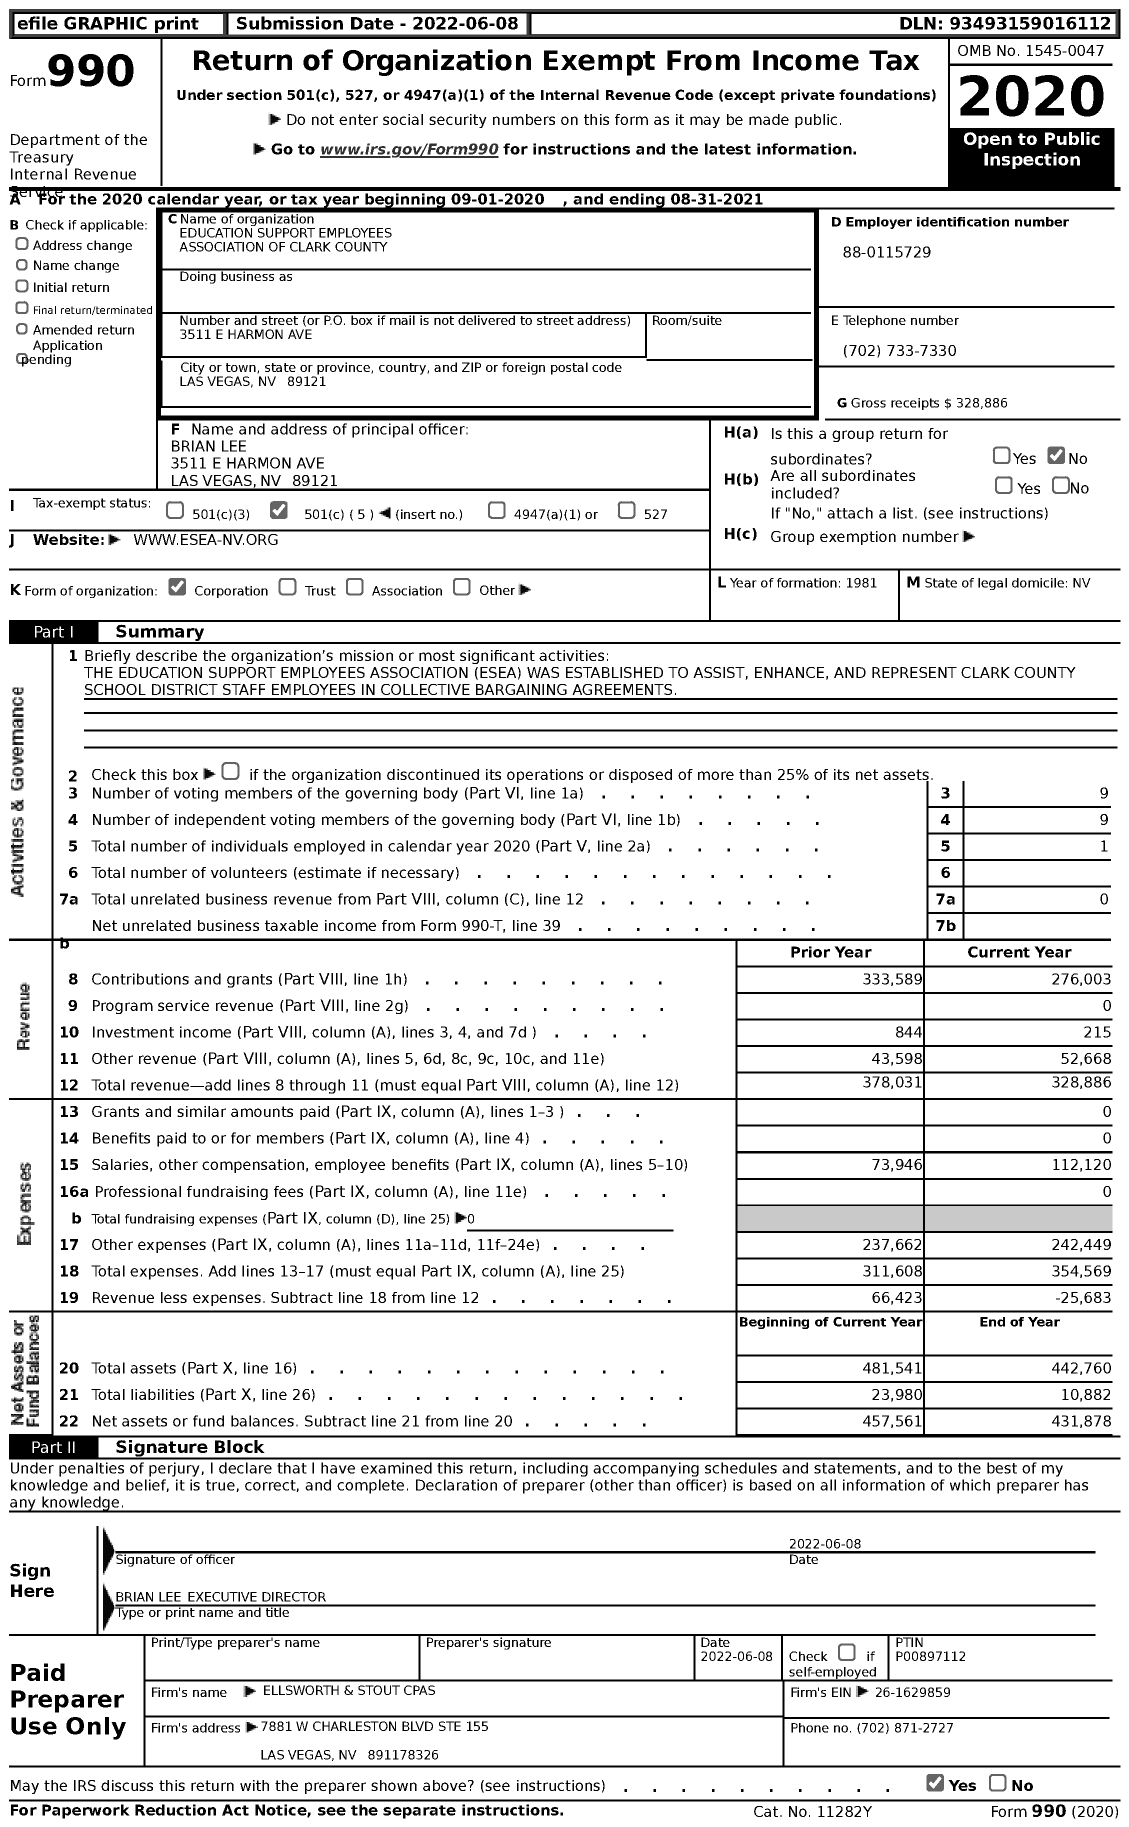 Image of first page of 2020 Form 990 for Education Support Employees Association of Clark County